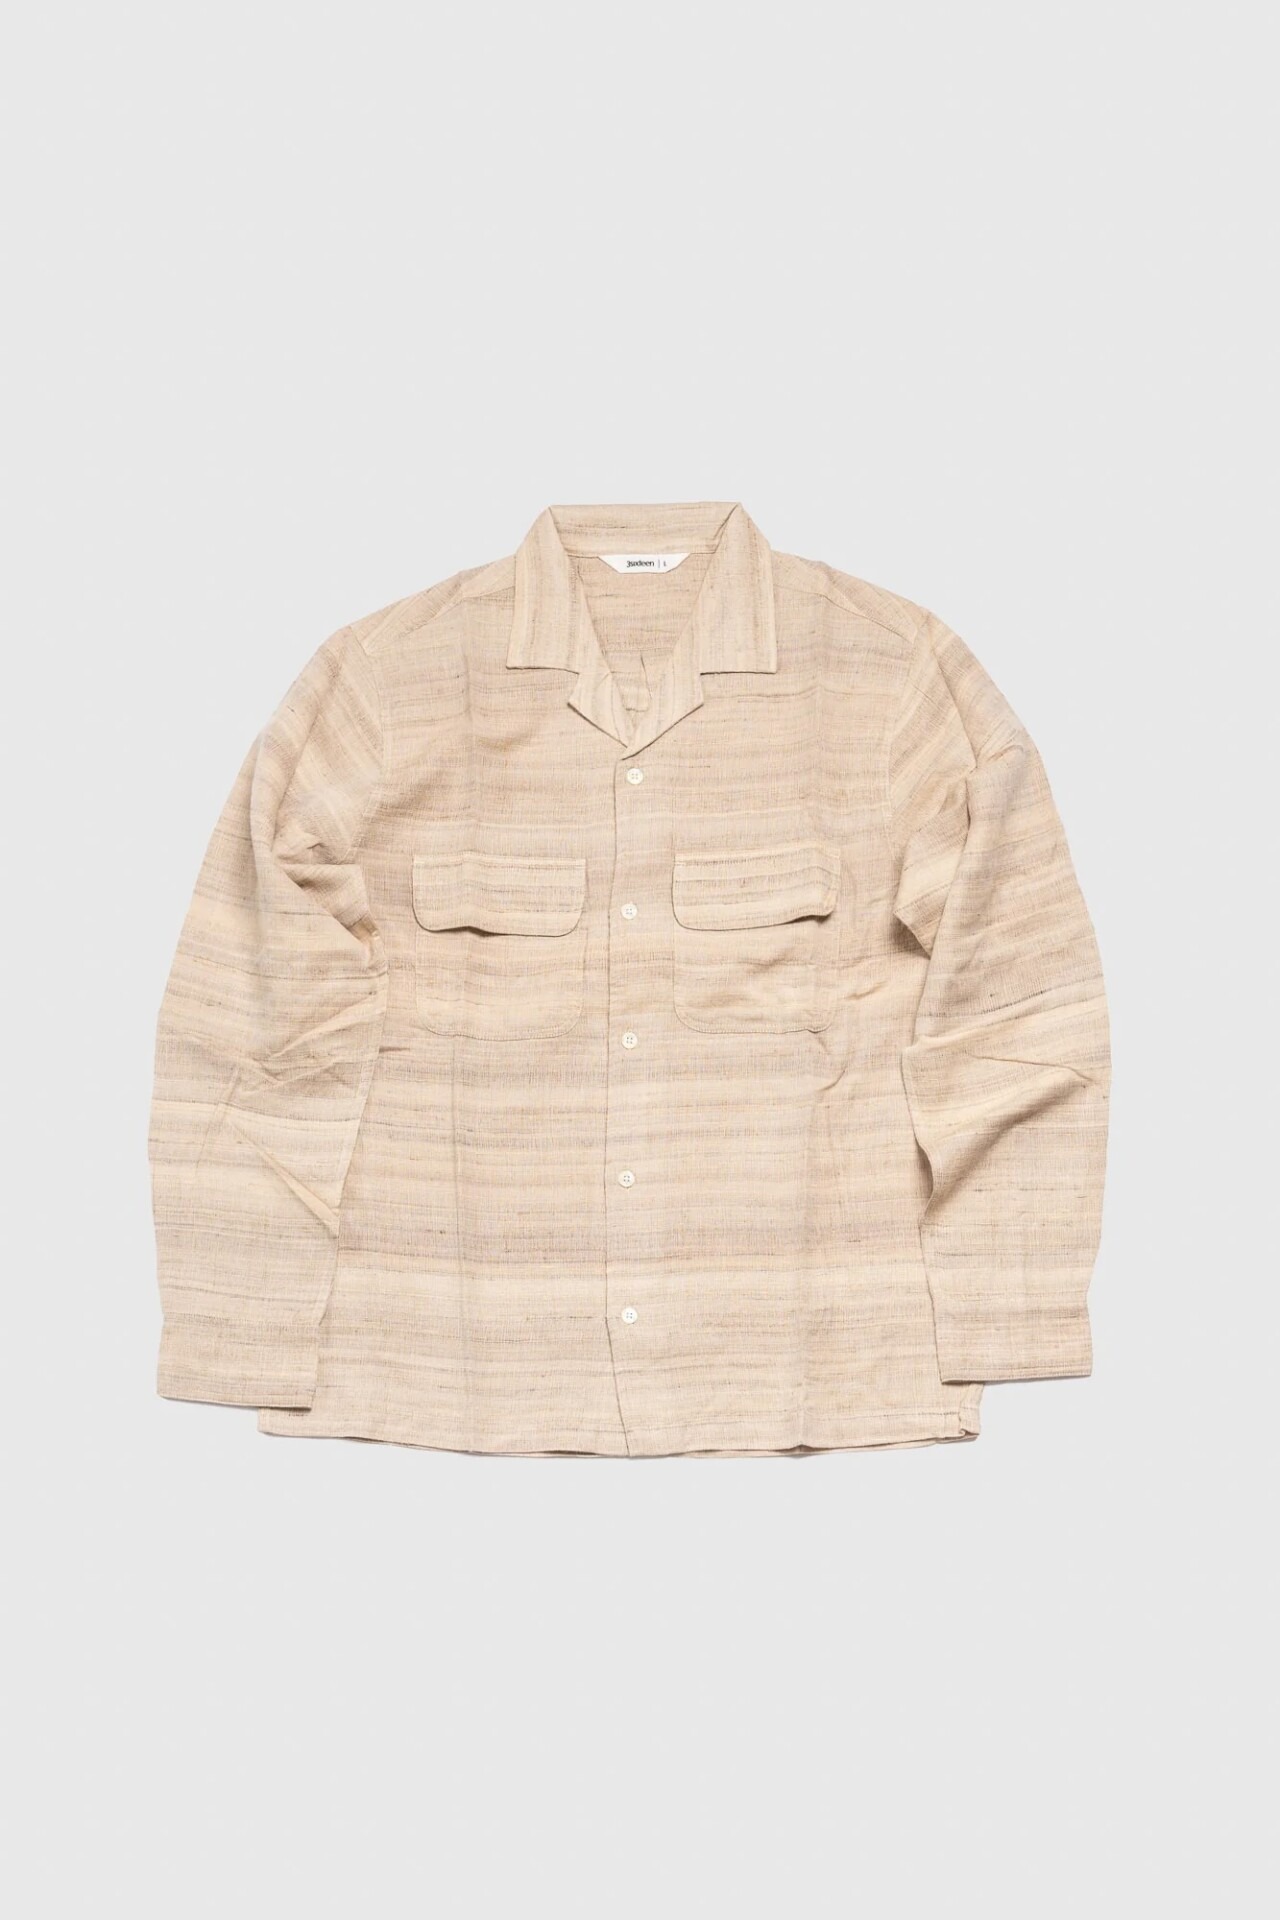 chemise 3sixteen tempest works